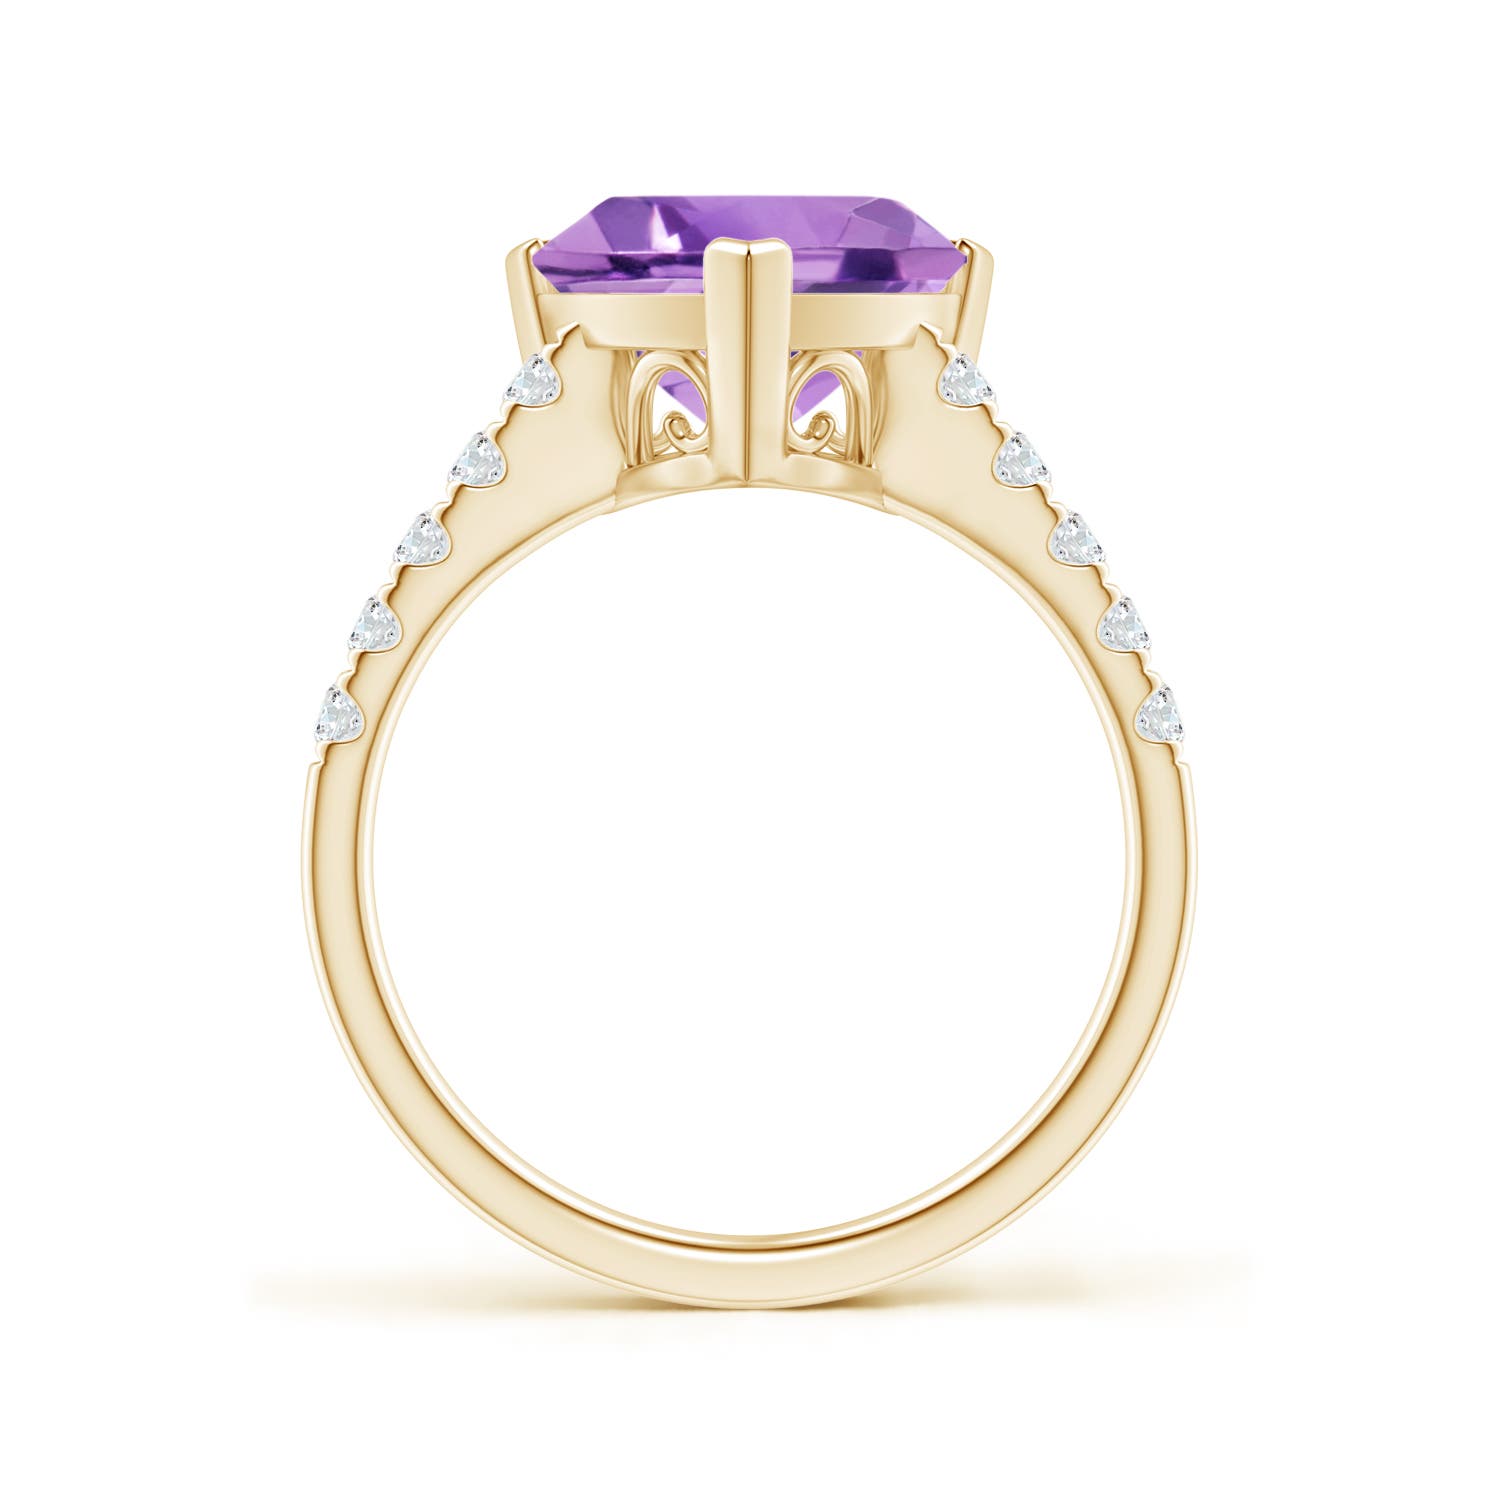 A - Amethyst / 2.95 CT / 14 KT Yellow Gold